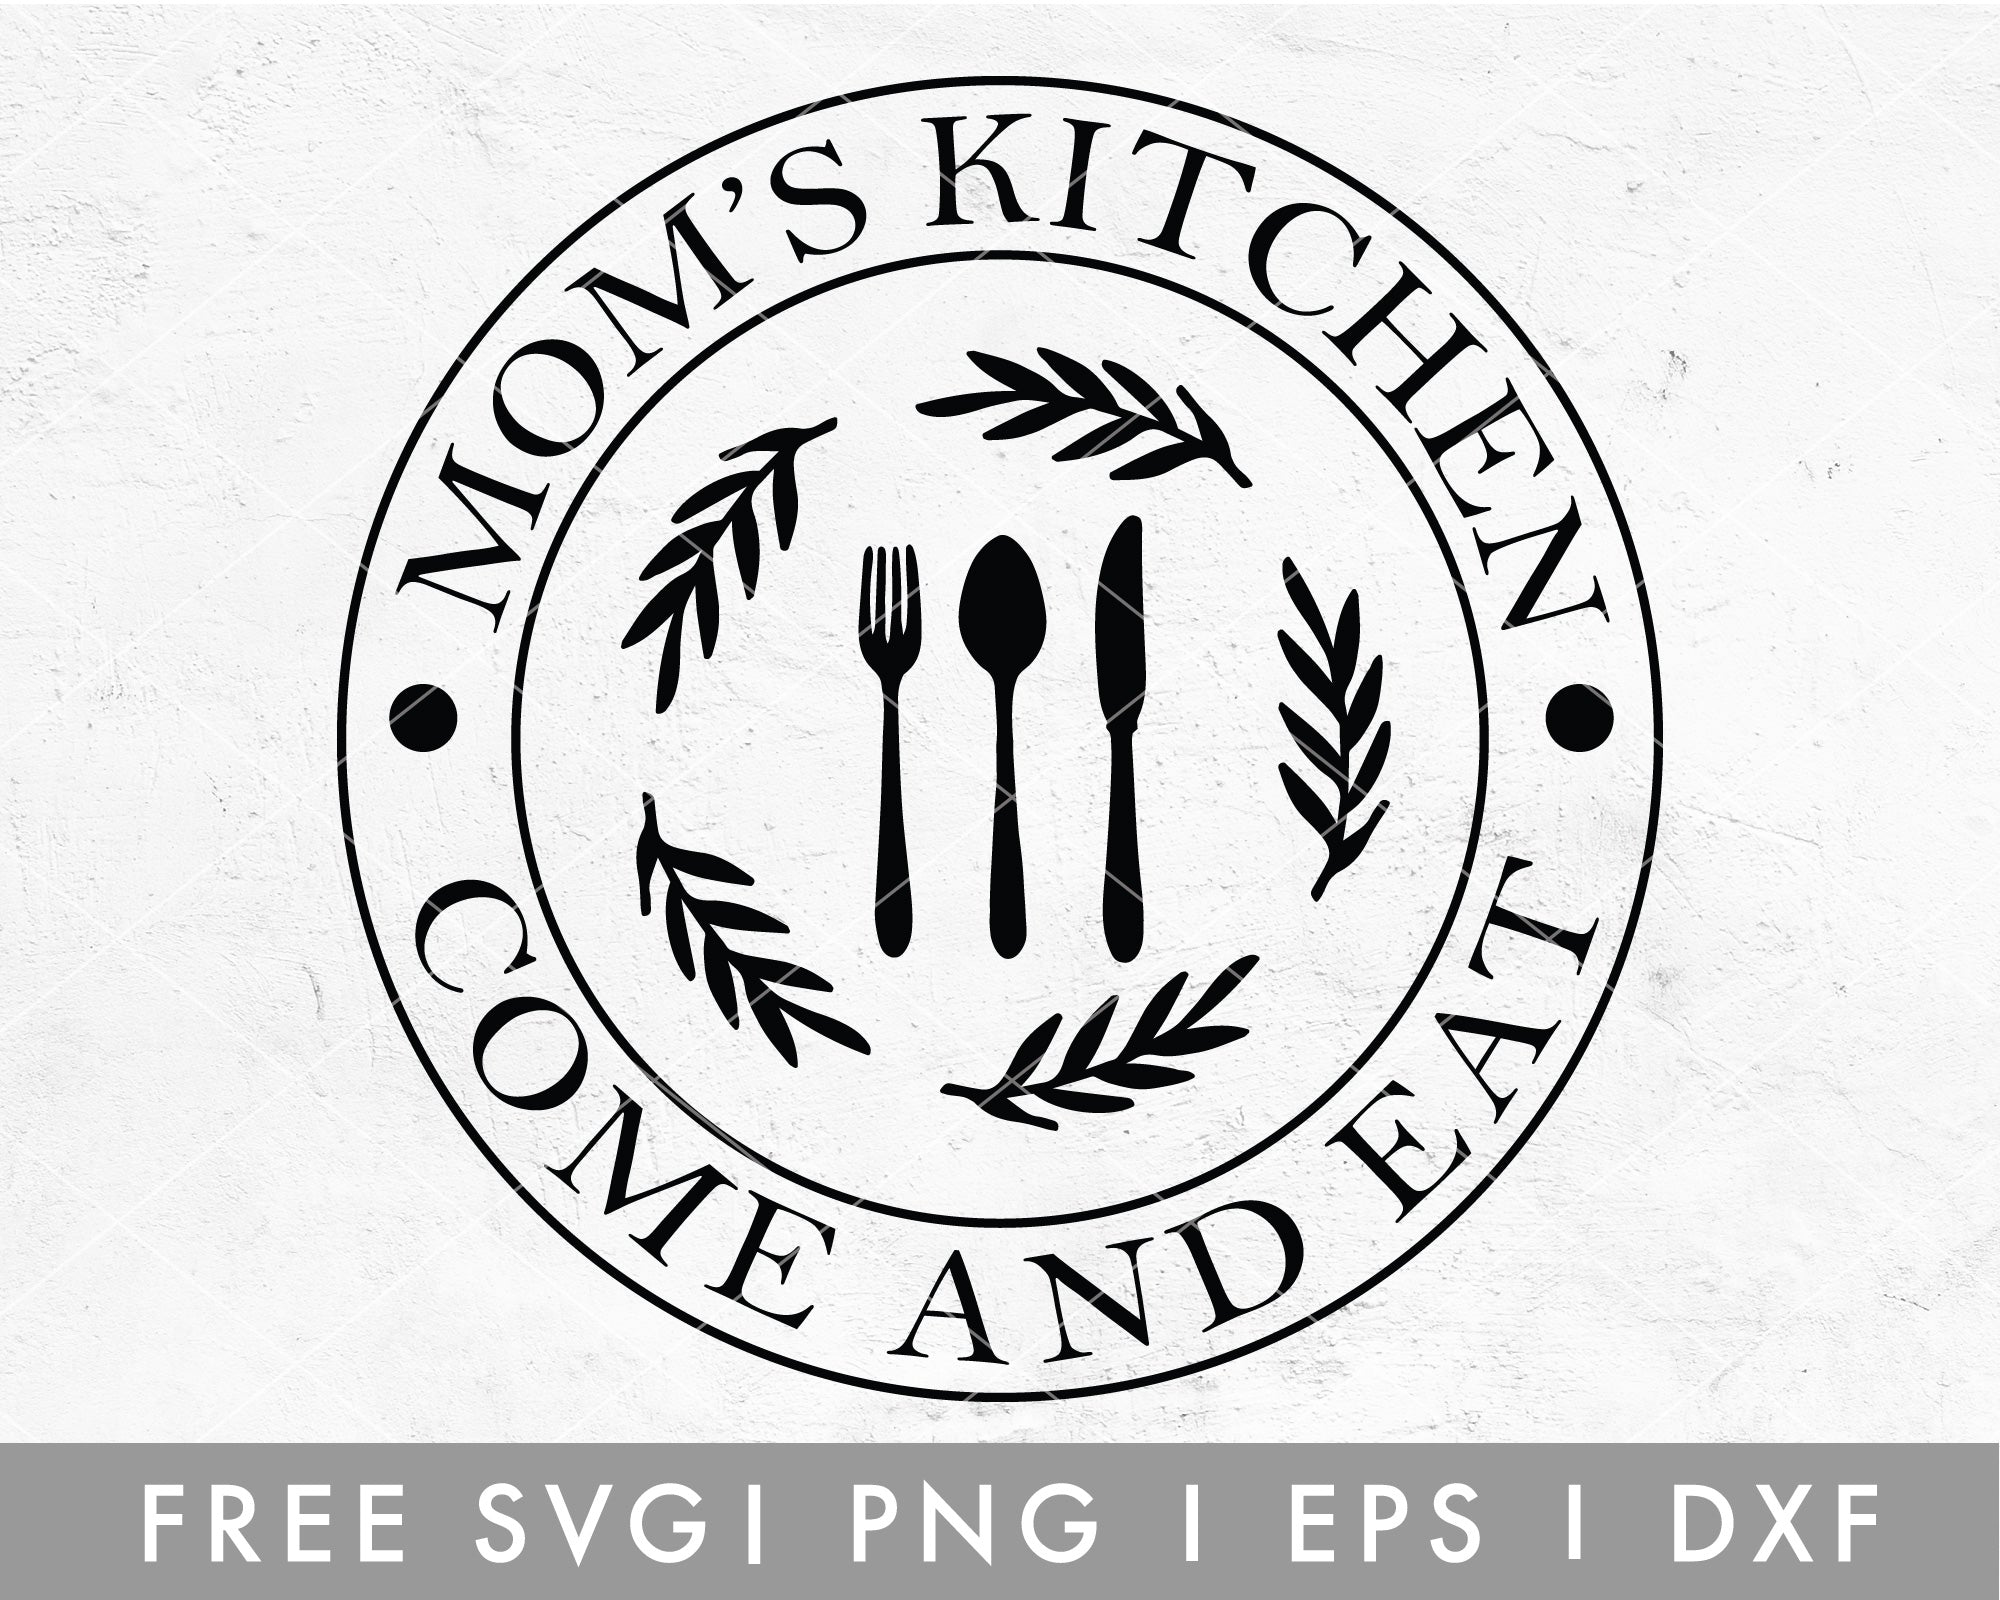 Moms kitchen on white background vector image on VectorStock | White  background, Vector images, Vector free